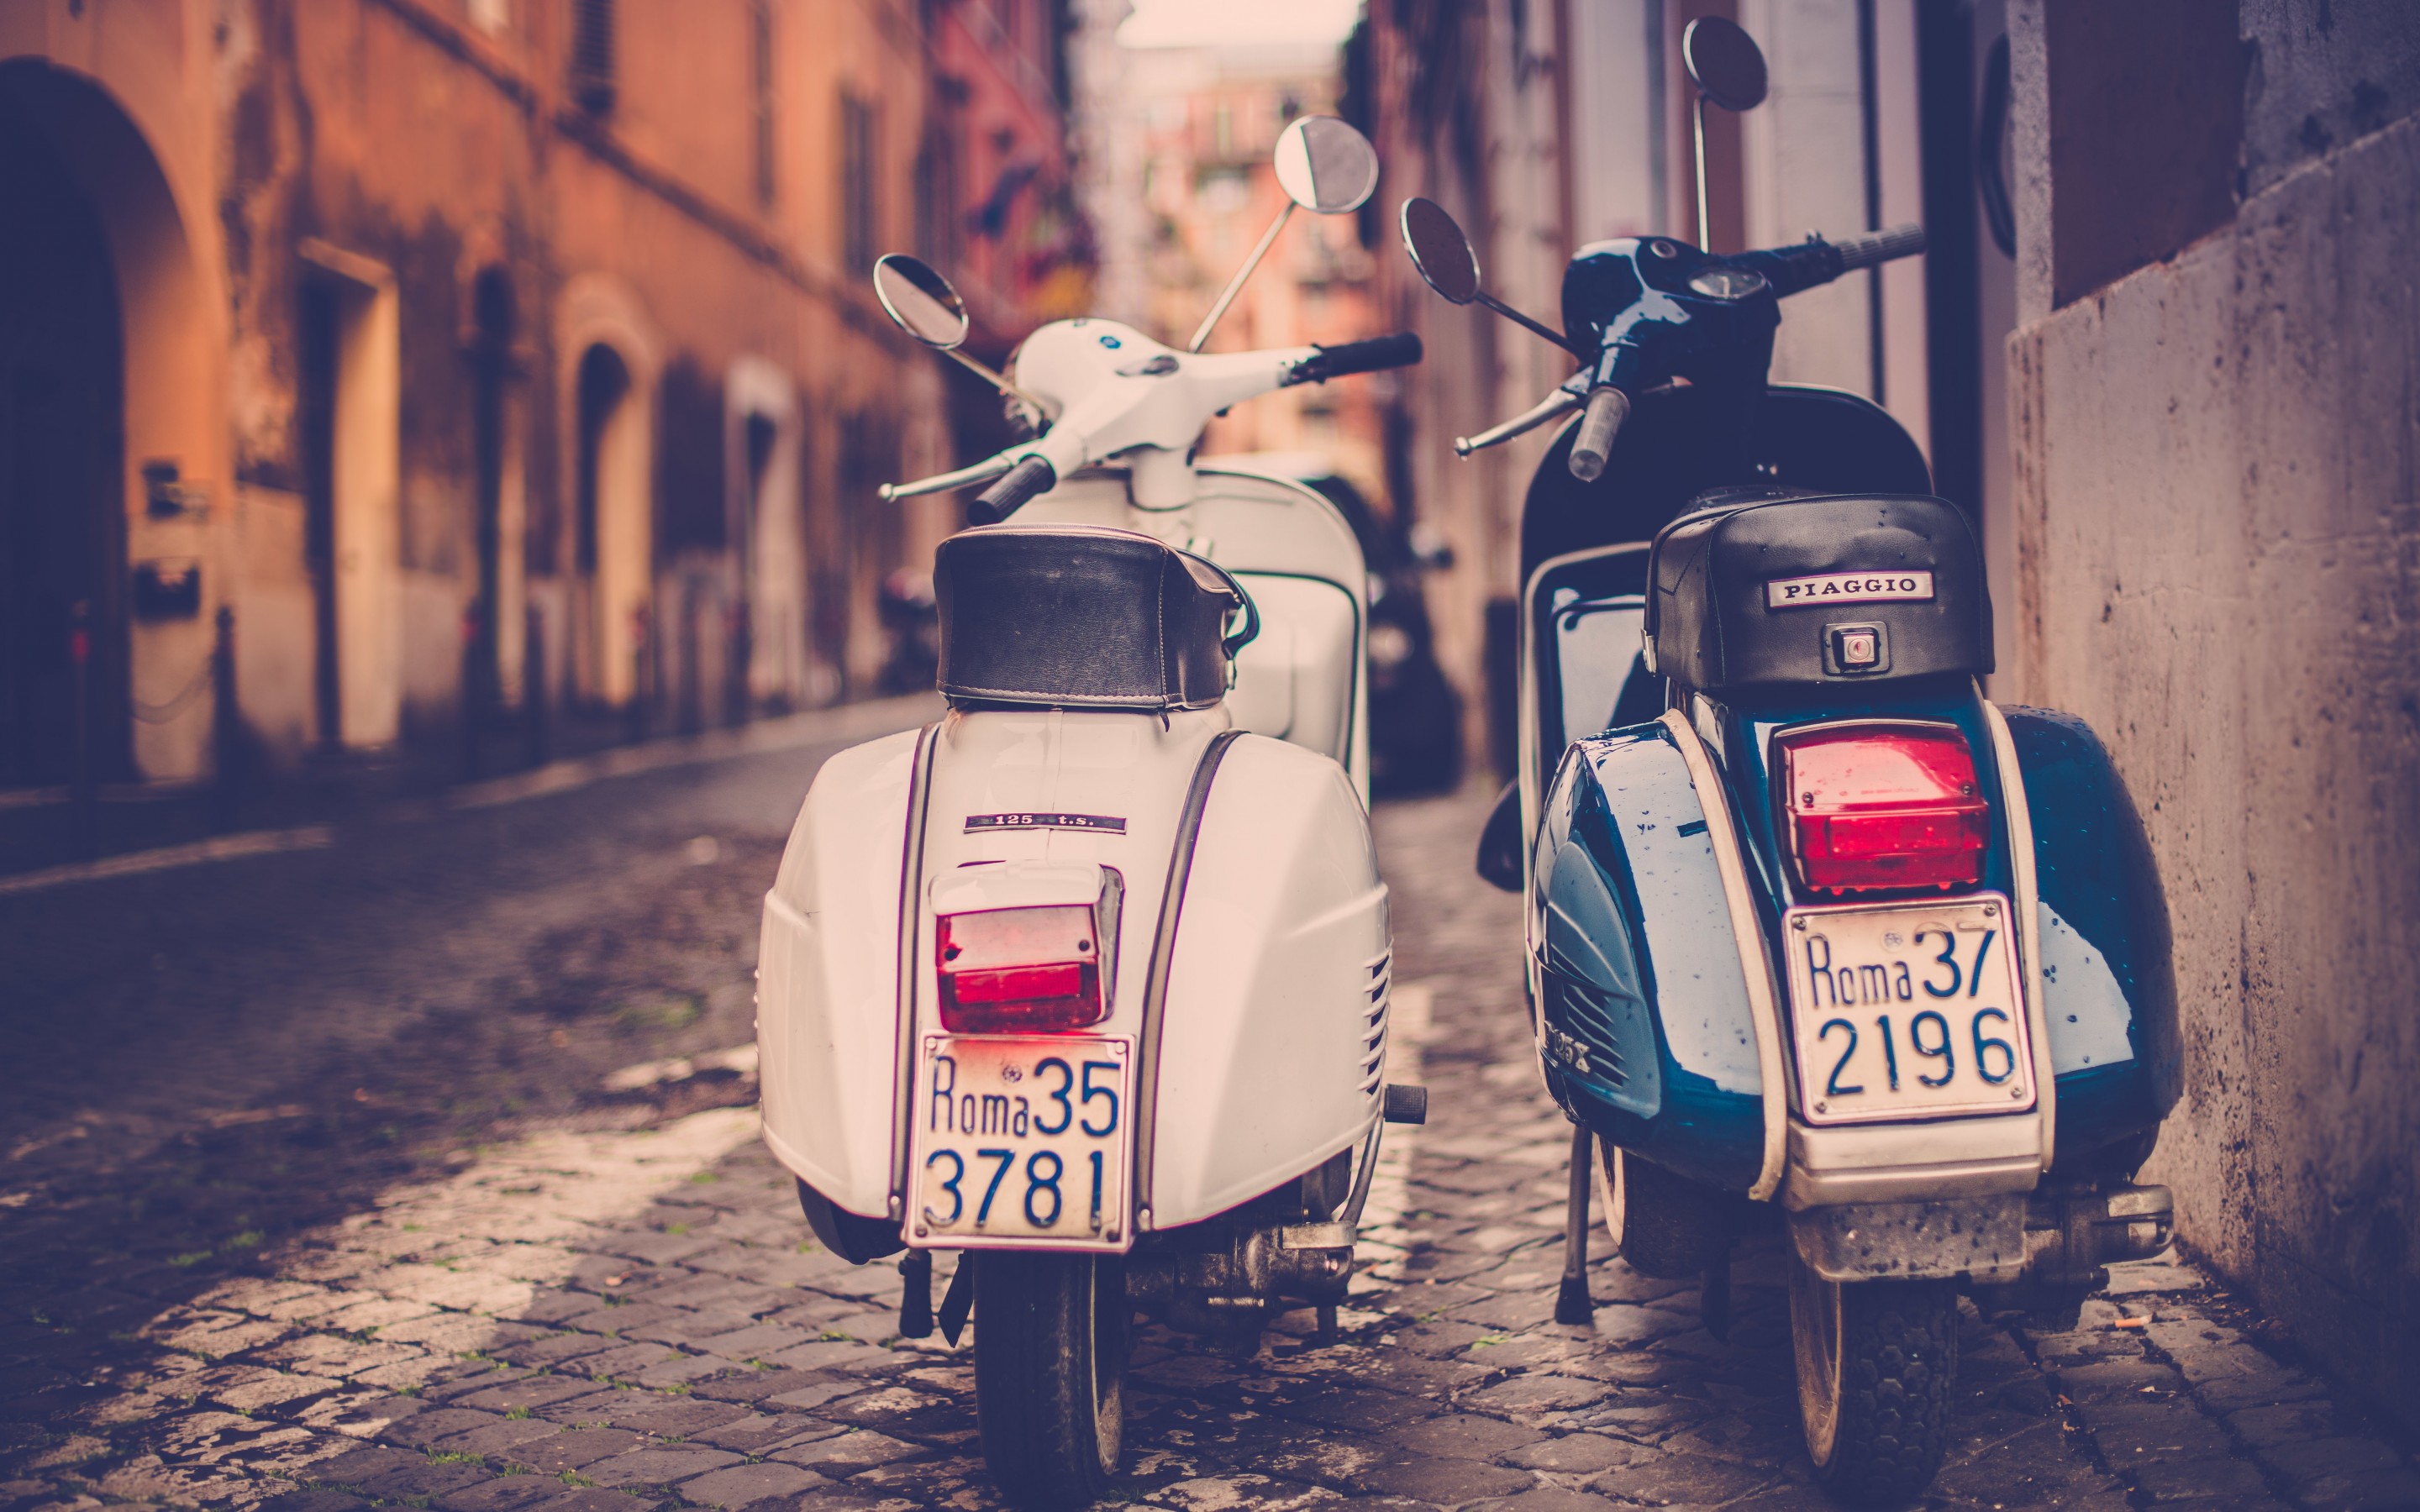 italy, piaggio, motorcycles, road, street, rome, moped iphone wallpaper